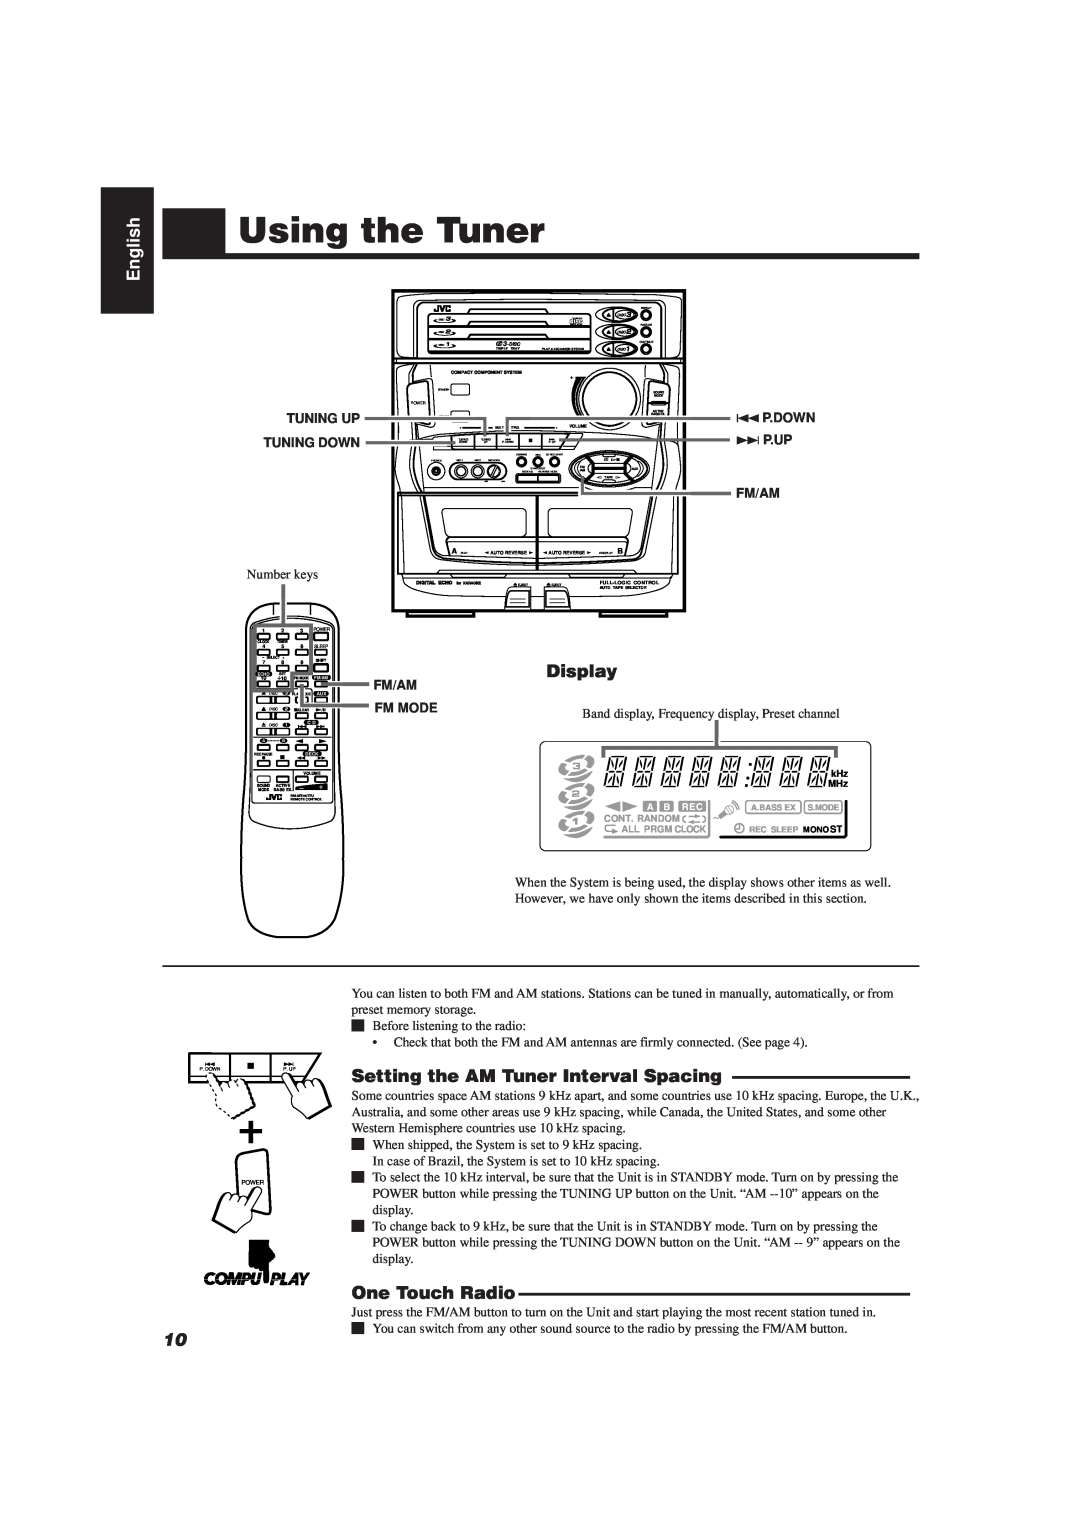 JVC CA-D501T, MX-D401T, MX-D301T manual Using the Tuner, English, Tuning Up Tuning Down, 4P.DOWN ¢P.UP FM/AM, Fm/Am, Fm Mode 